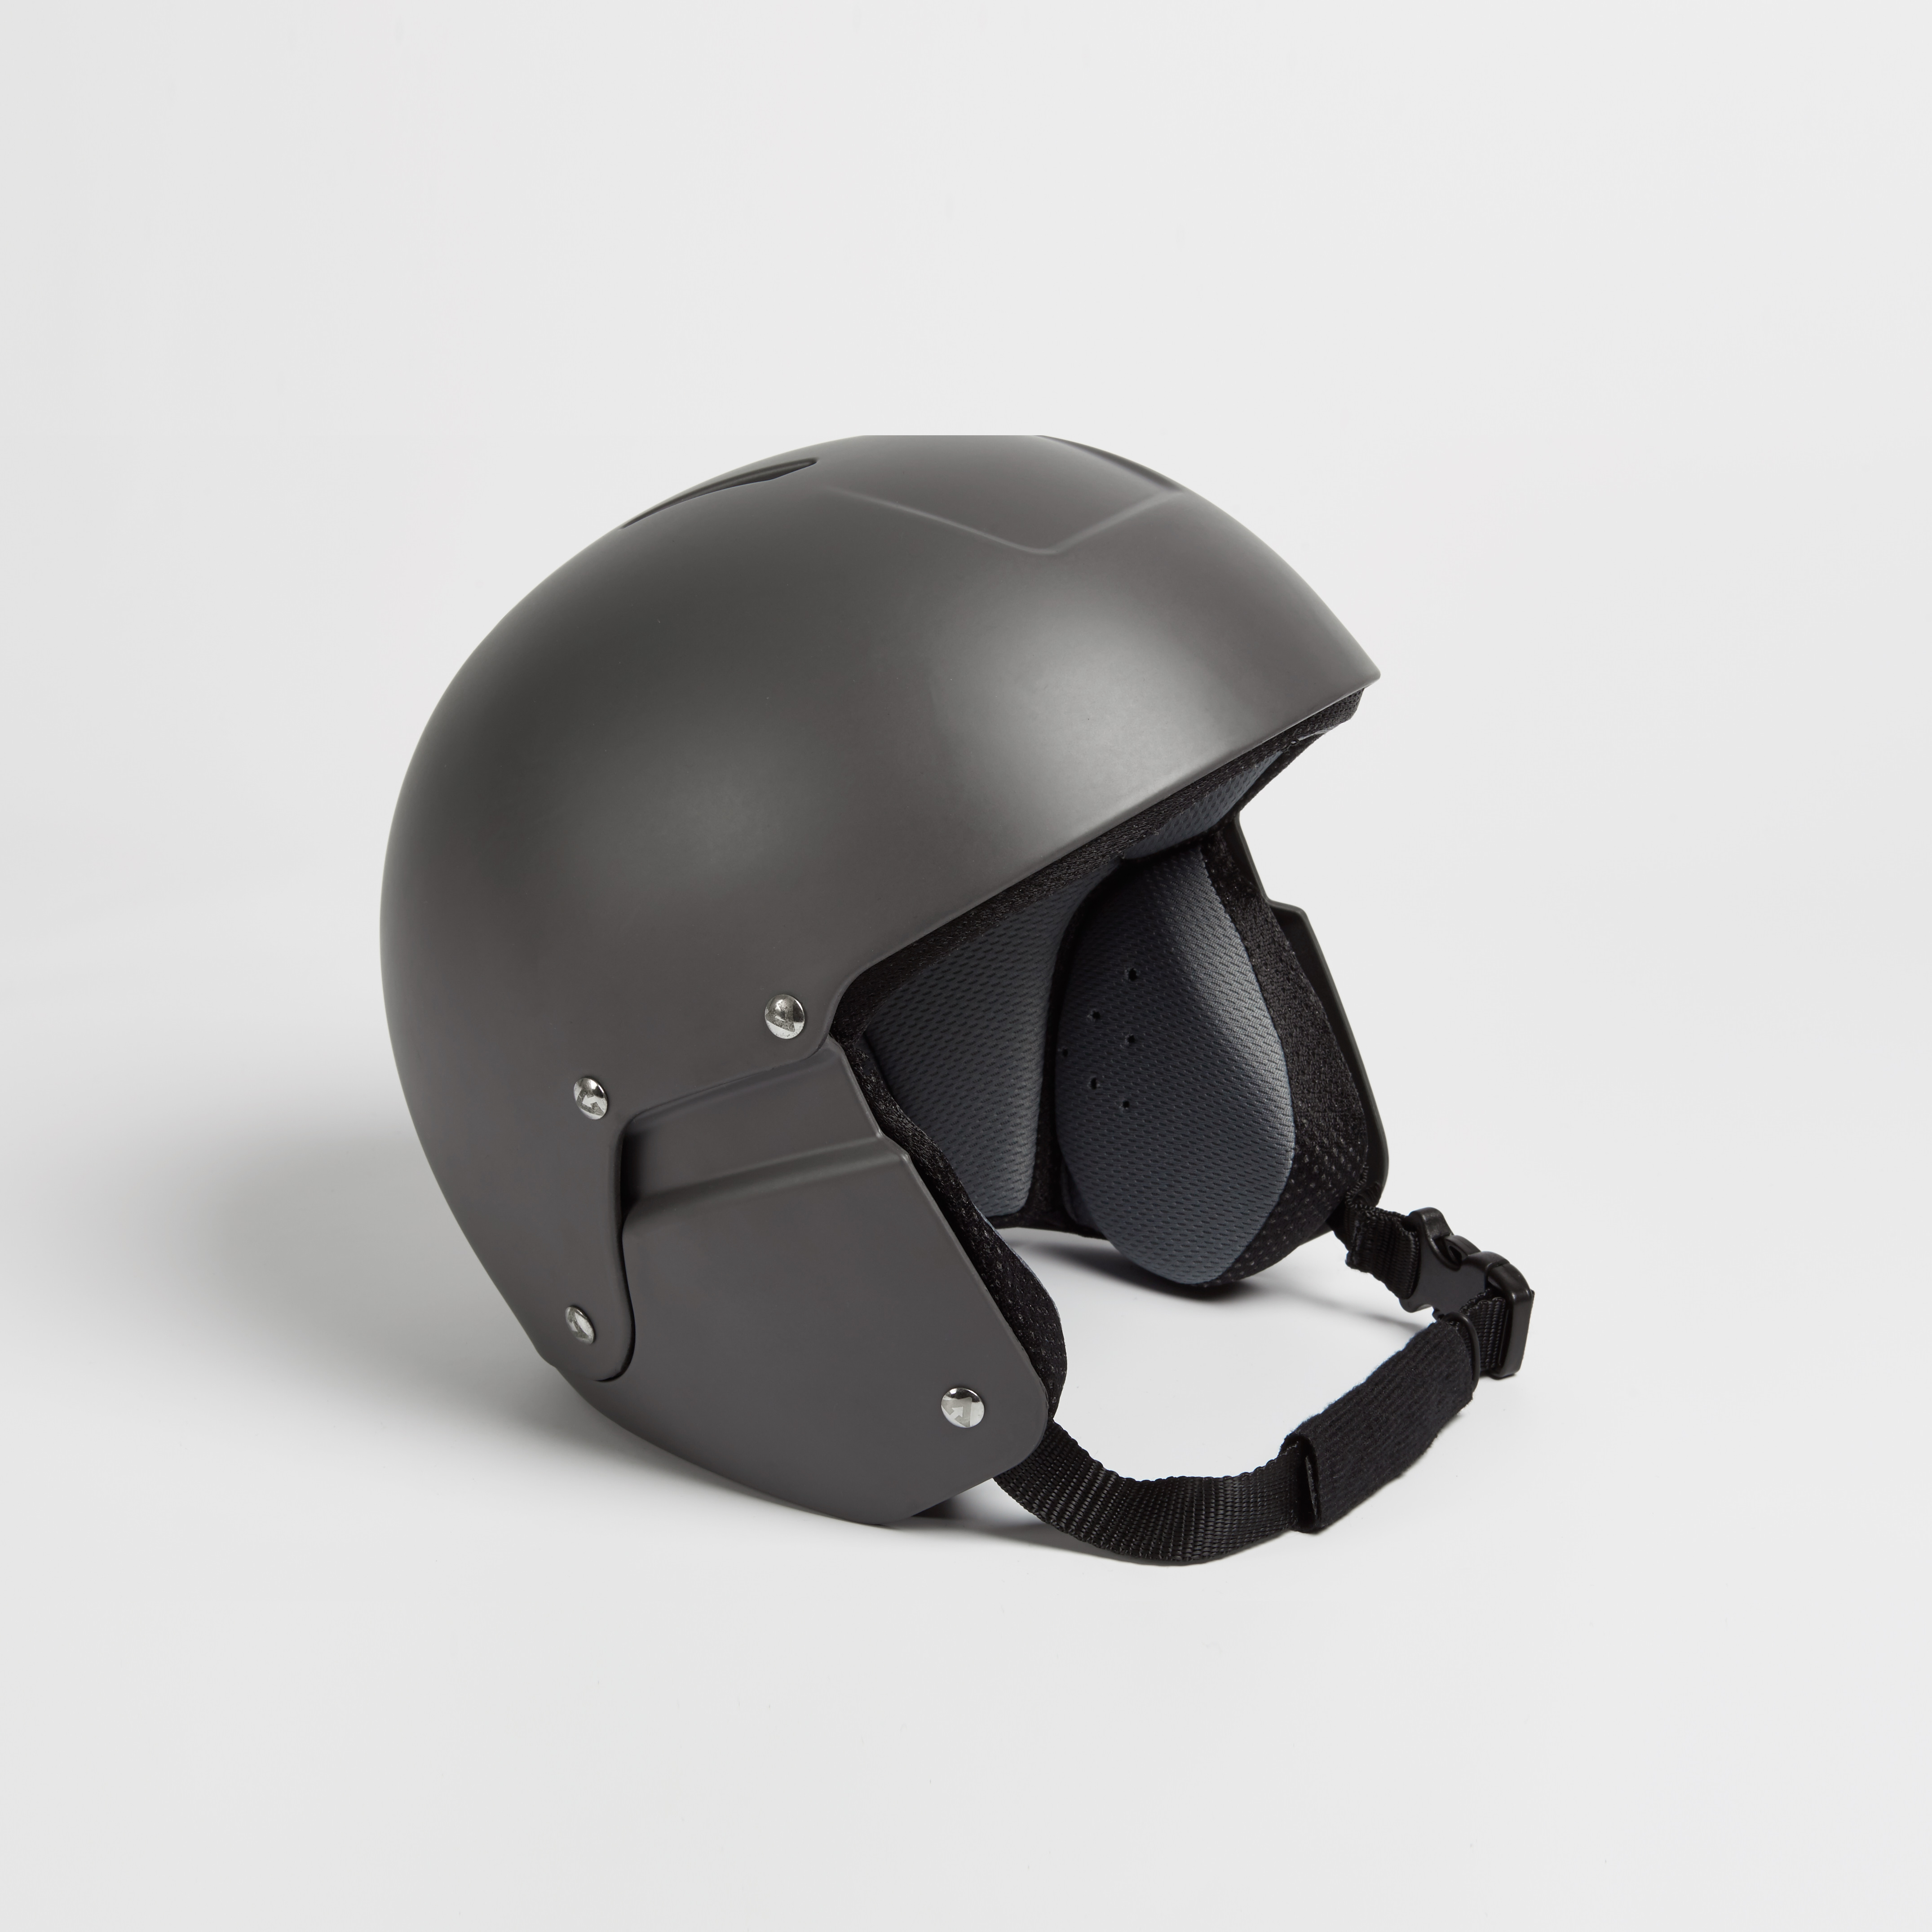 Benny Helmet | PHNX Skydive - skydive equipment and cool goodies for ...